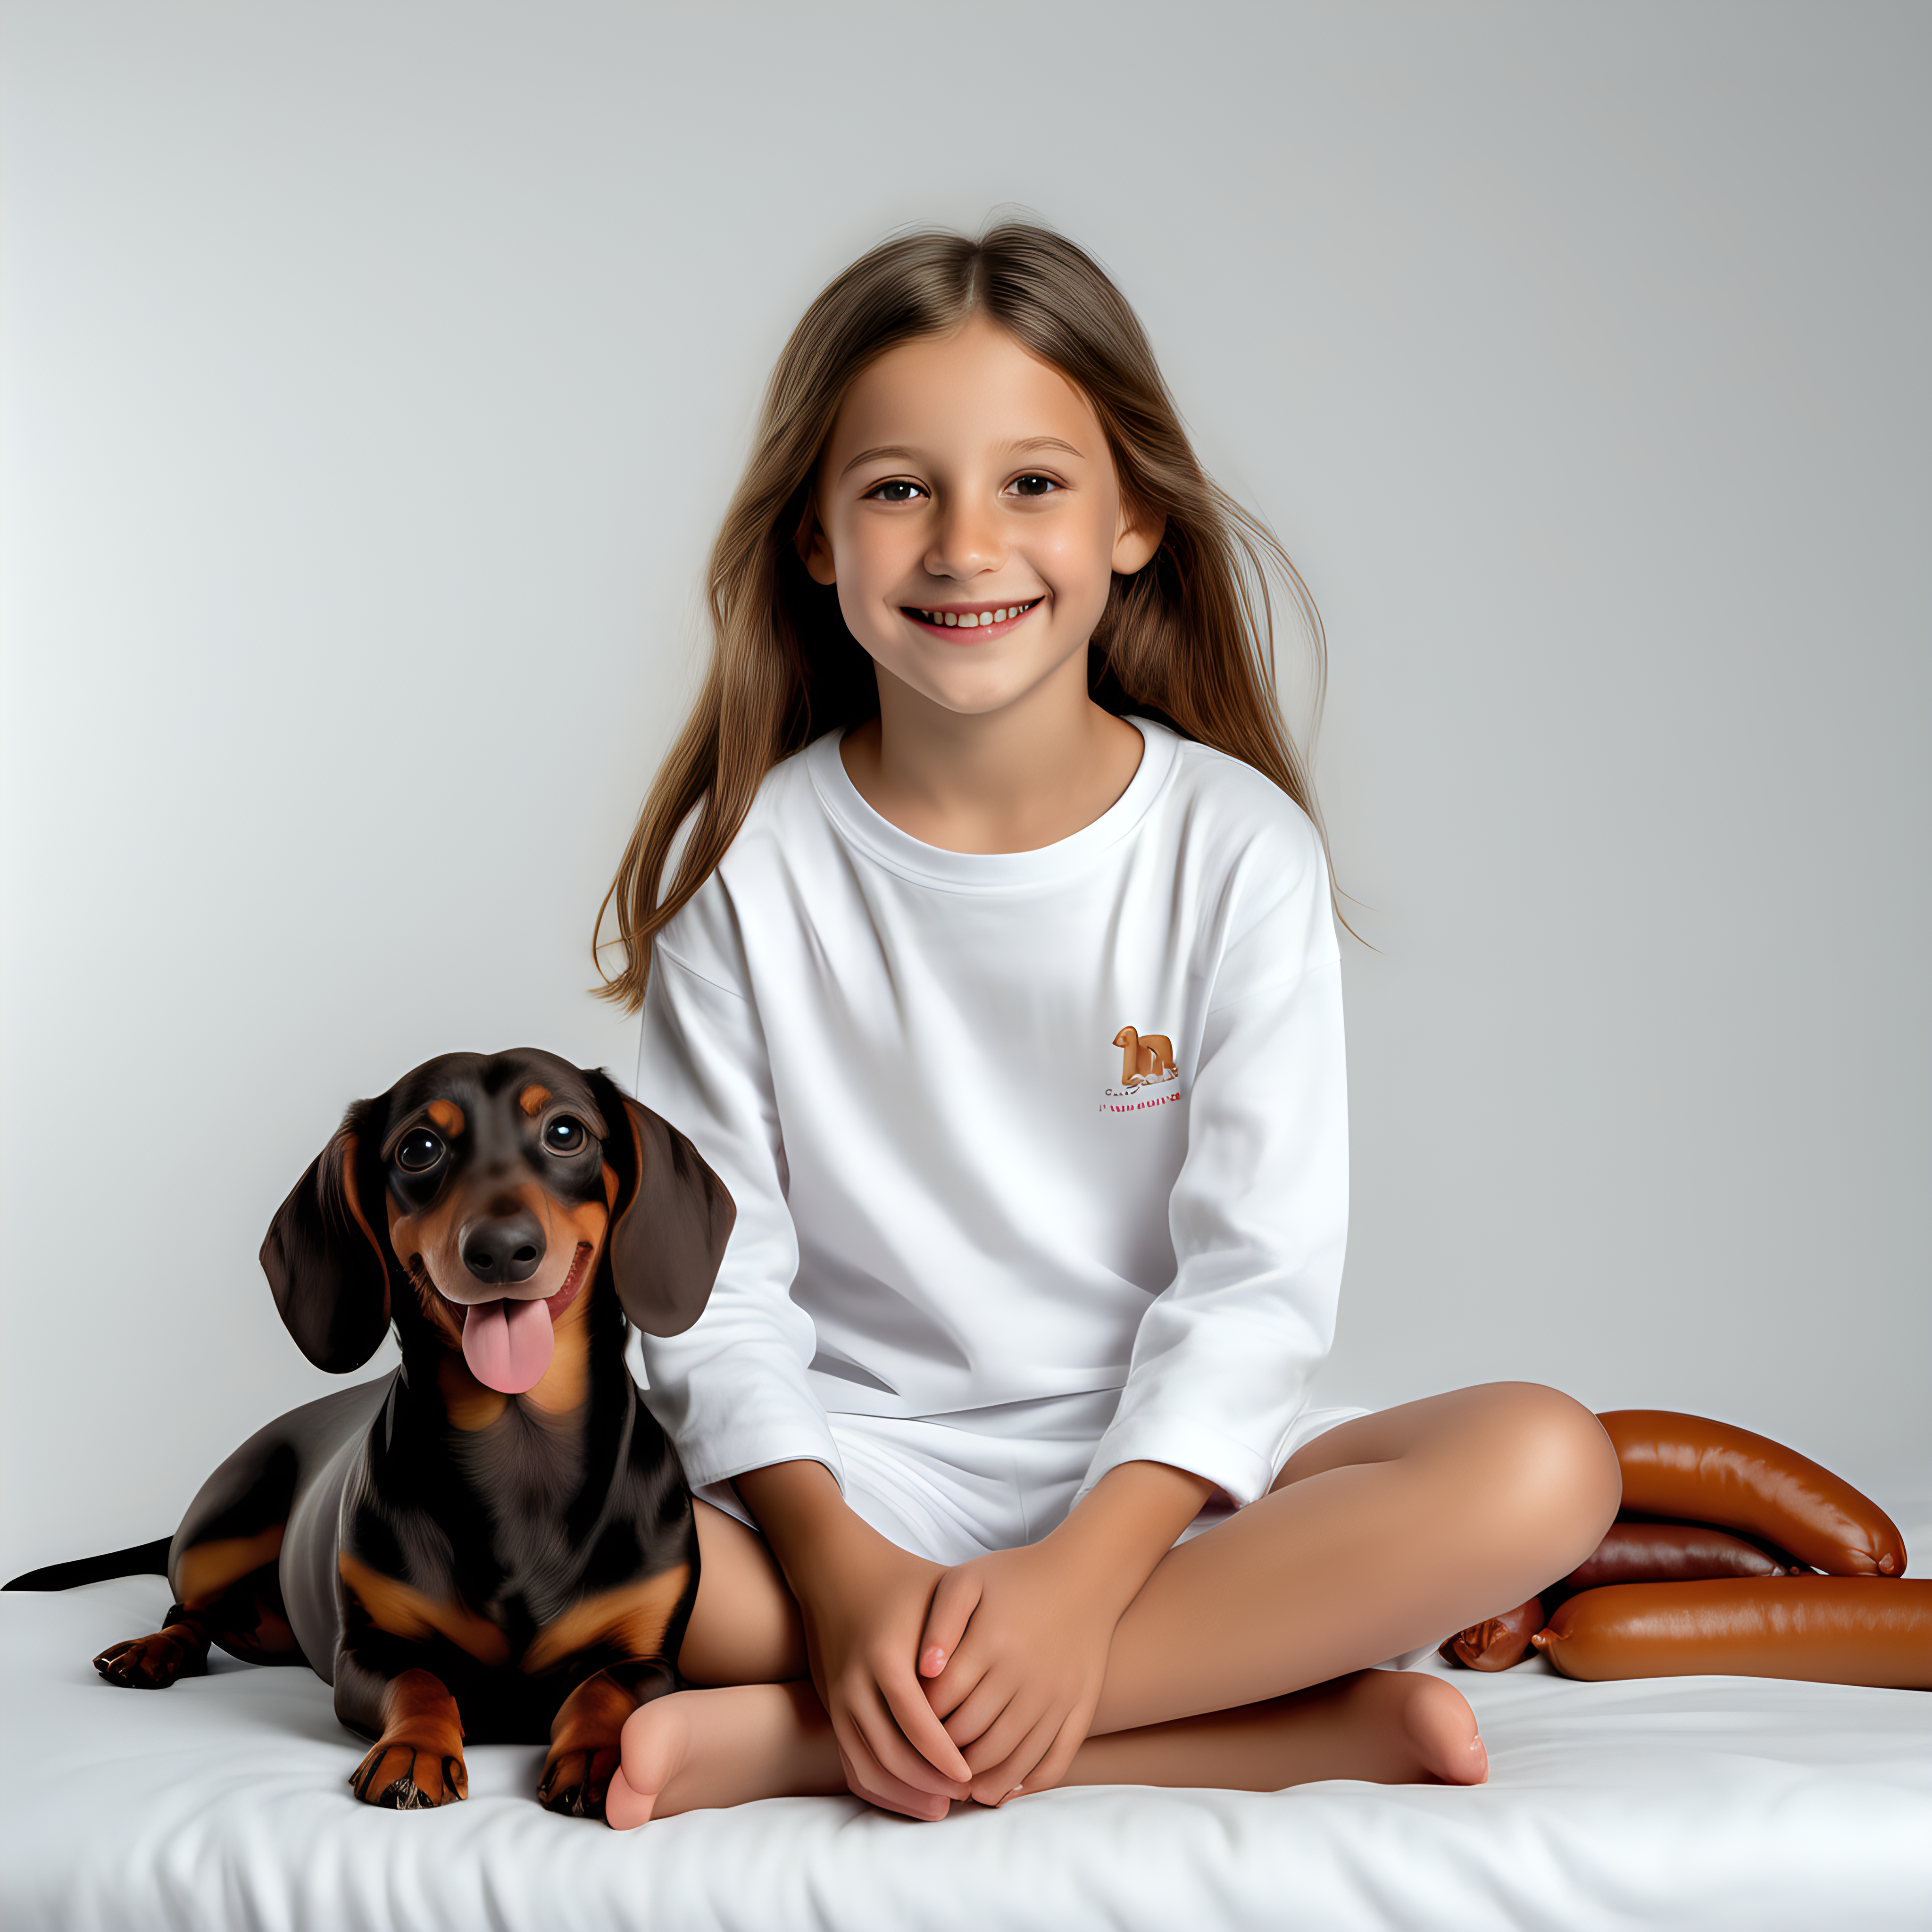 “Perfect Facial Features photo of a smiling 10 year old girl sitting  in  white cotton tshirt pyjama with no print, long  tight cuff sleeves, loose long pants) ,surrounded by wienerdogs, no background, hyper realistic, ideal face template, HD, happy, Fujifilm X-T3, 1/1250sec at f/2.8, ISO 160, 84mm”